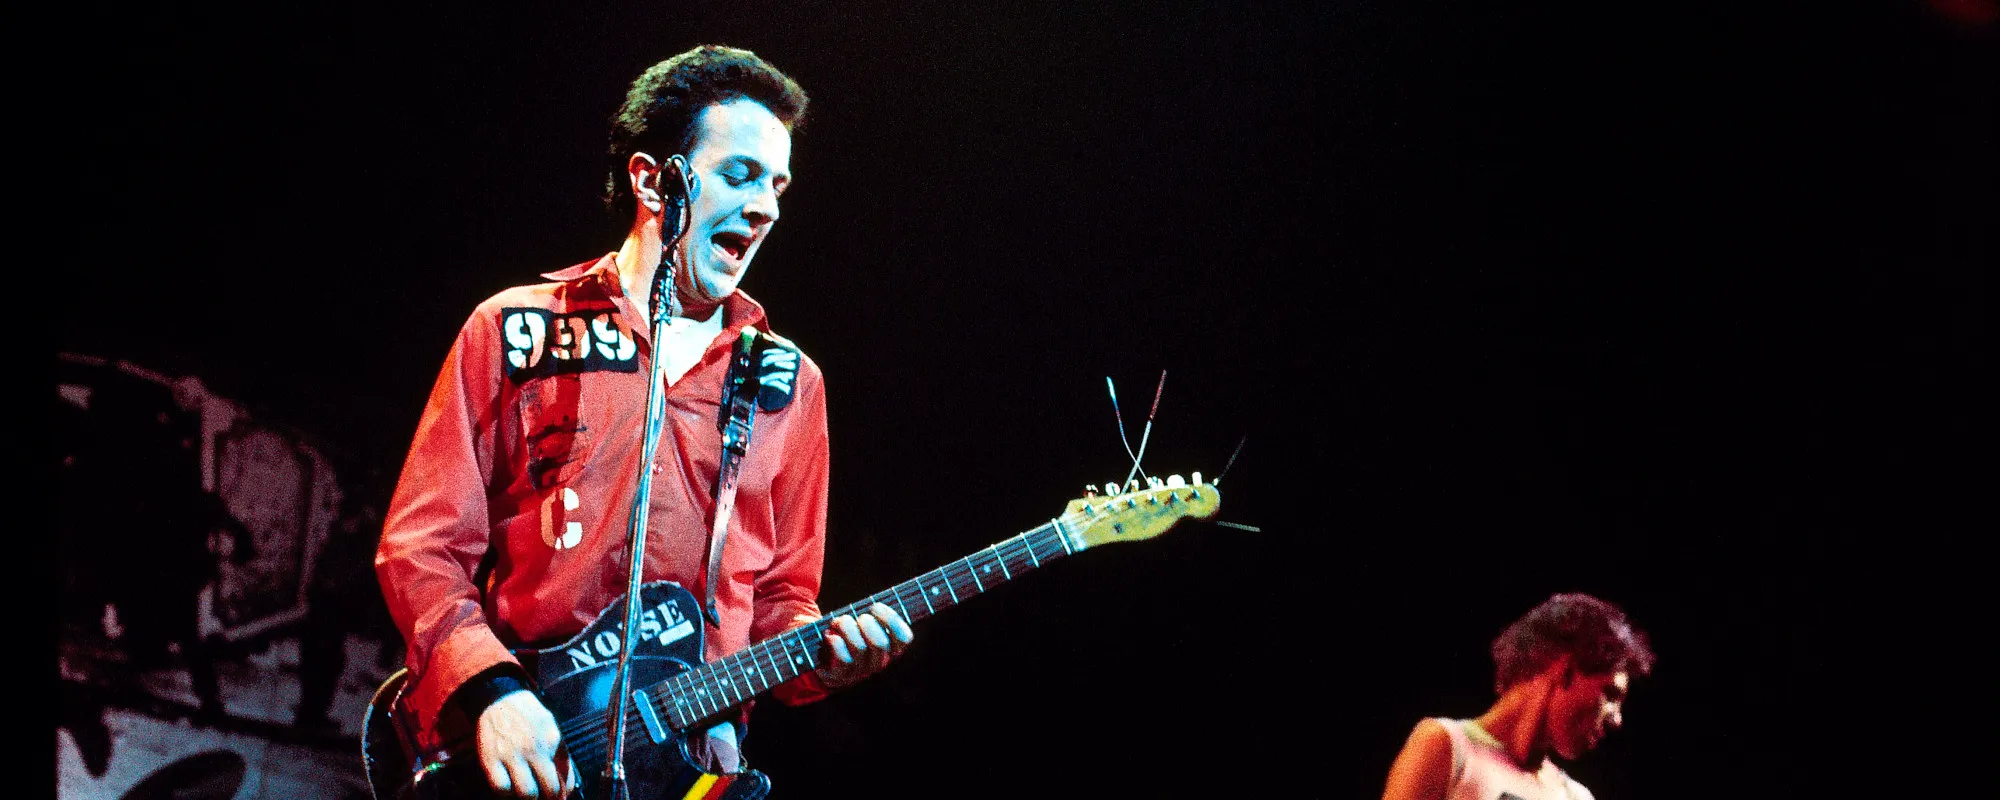 Behind the Song “Should I Stay or Should I Go” by The Clash and Why It Went to No. 1 Only After They Were a Band